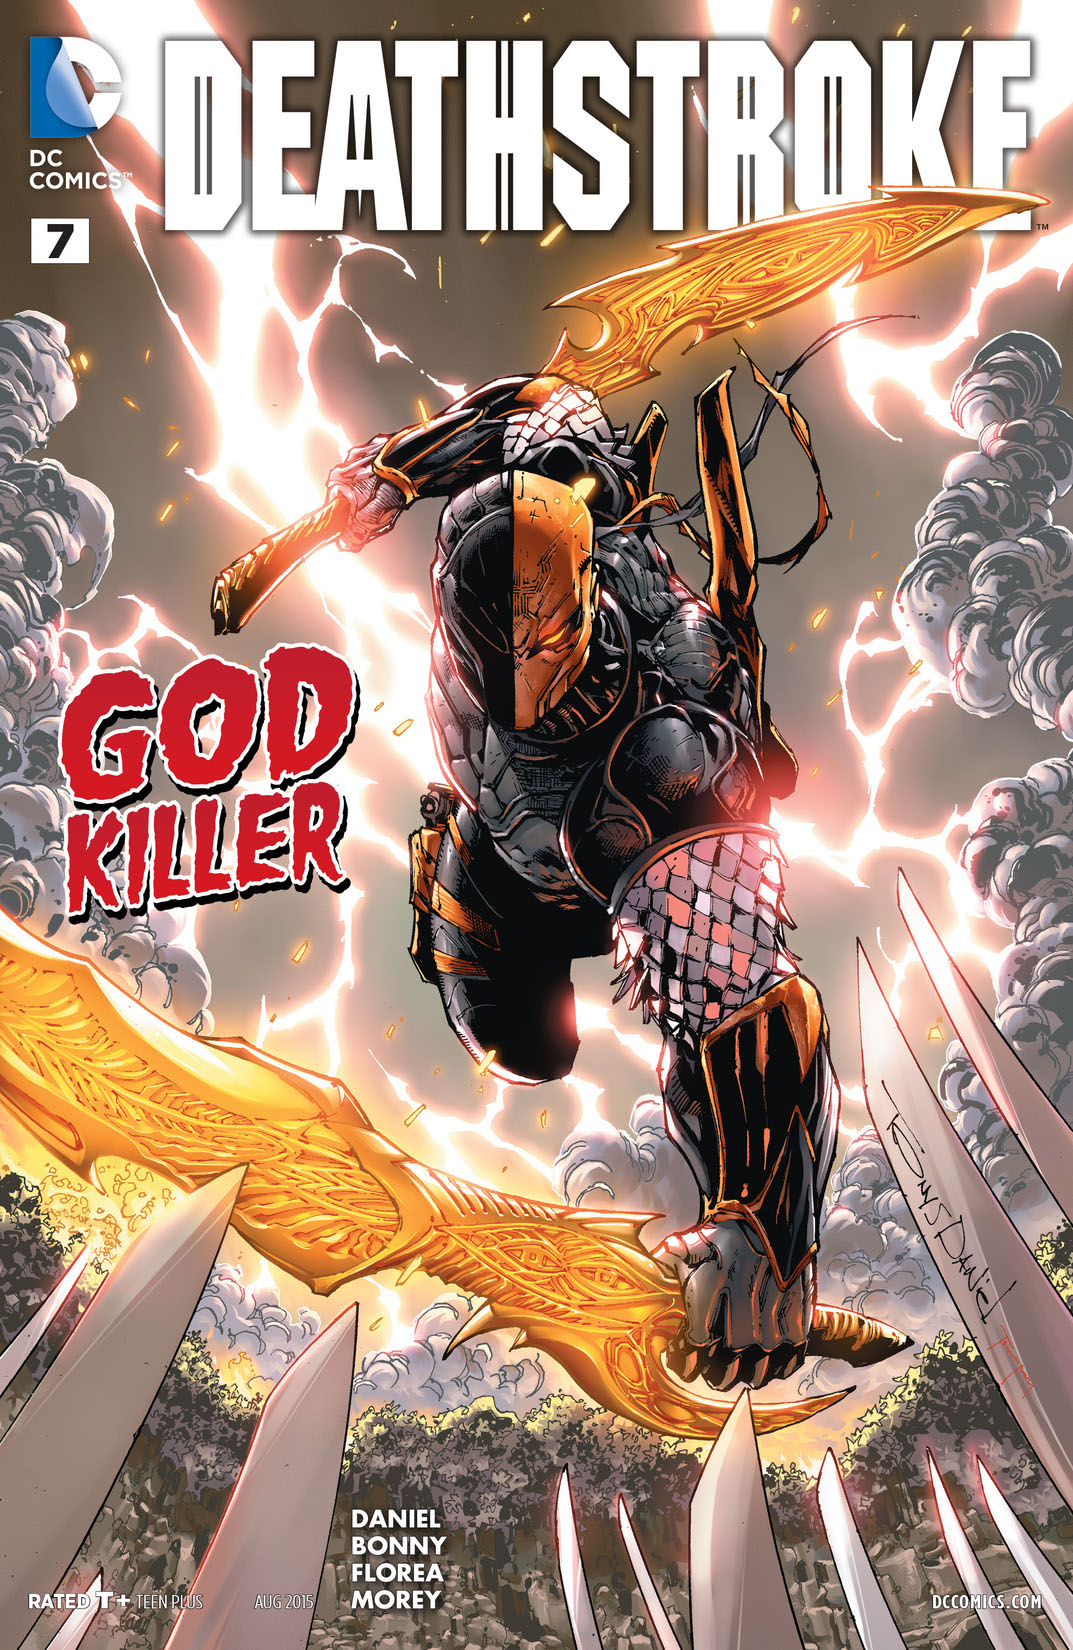 Deathstroke (2014-) #7 preview images